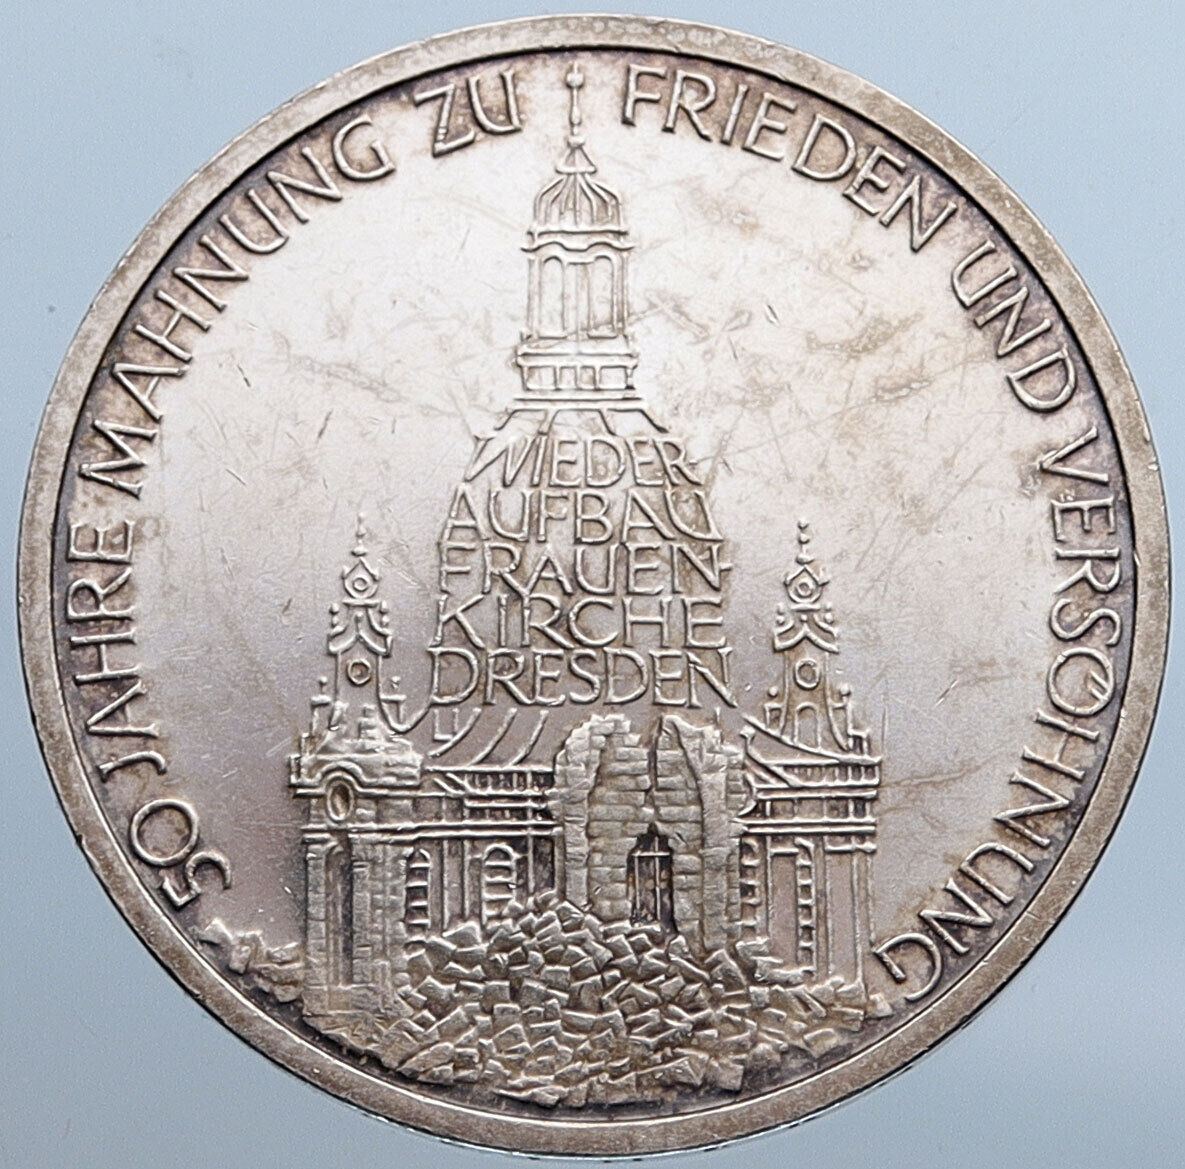 1995 J Germany Frauenkirche CATHEDRAL in DRESDEN Old Silver 10 Mark Coin i115290